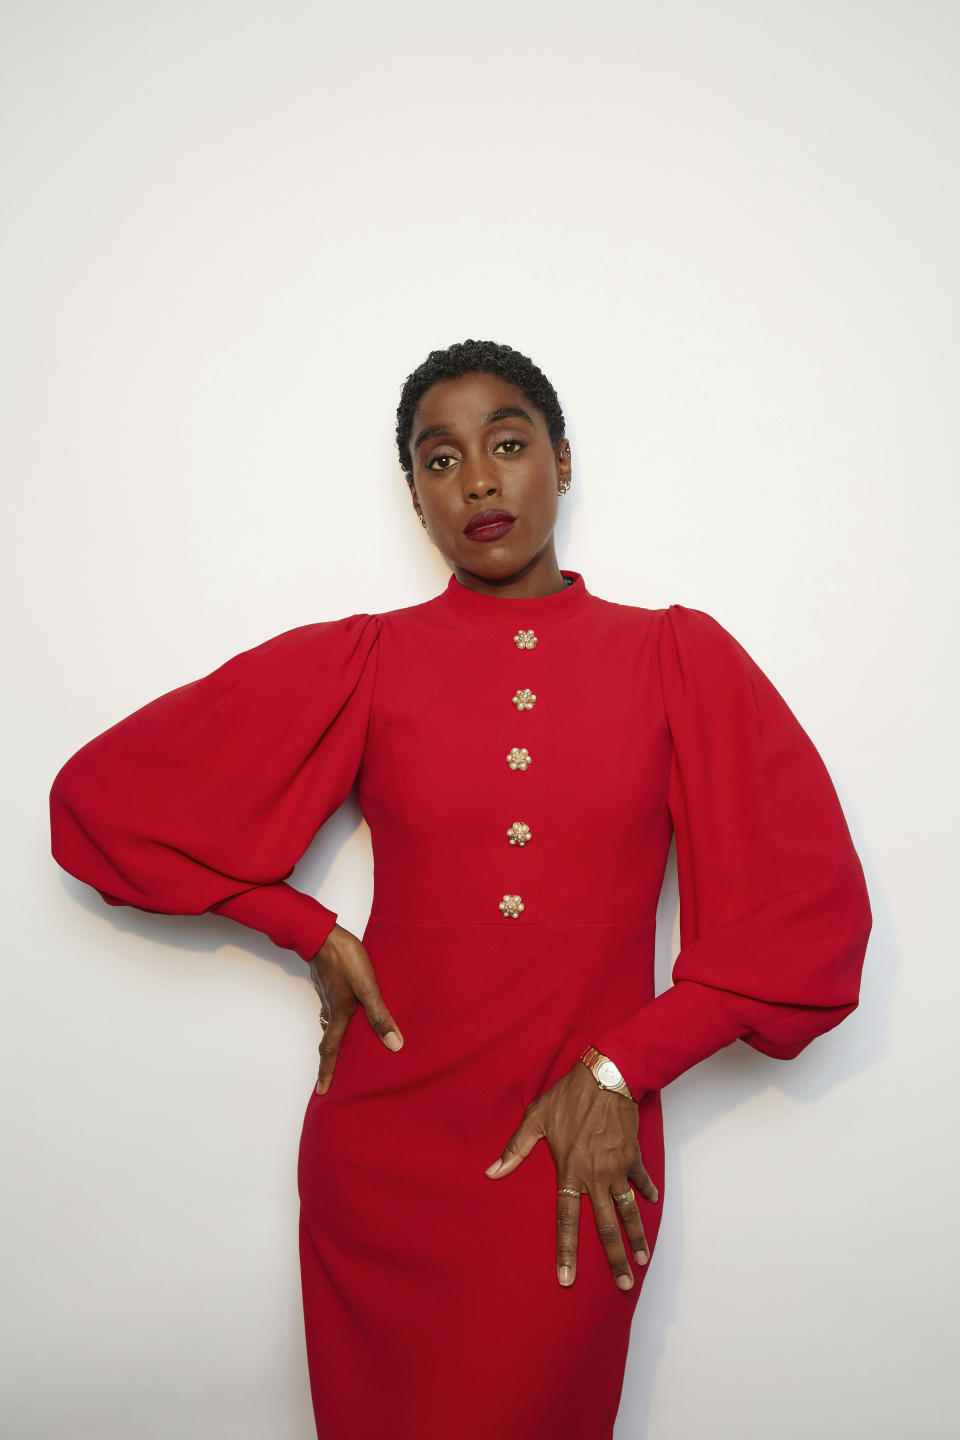 Lashana Lynch poses for a portrait to promote the film "No Time to Die" on Sunday, Oct. 3, 2021, in New York. (Photo by Taylor Jewell/Invision/AP)